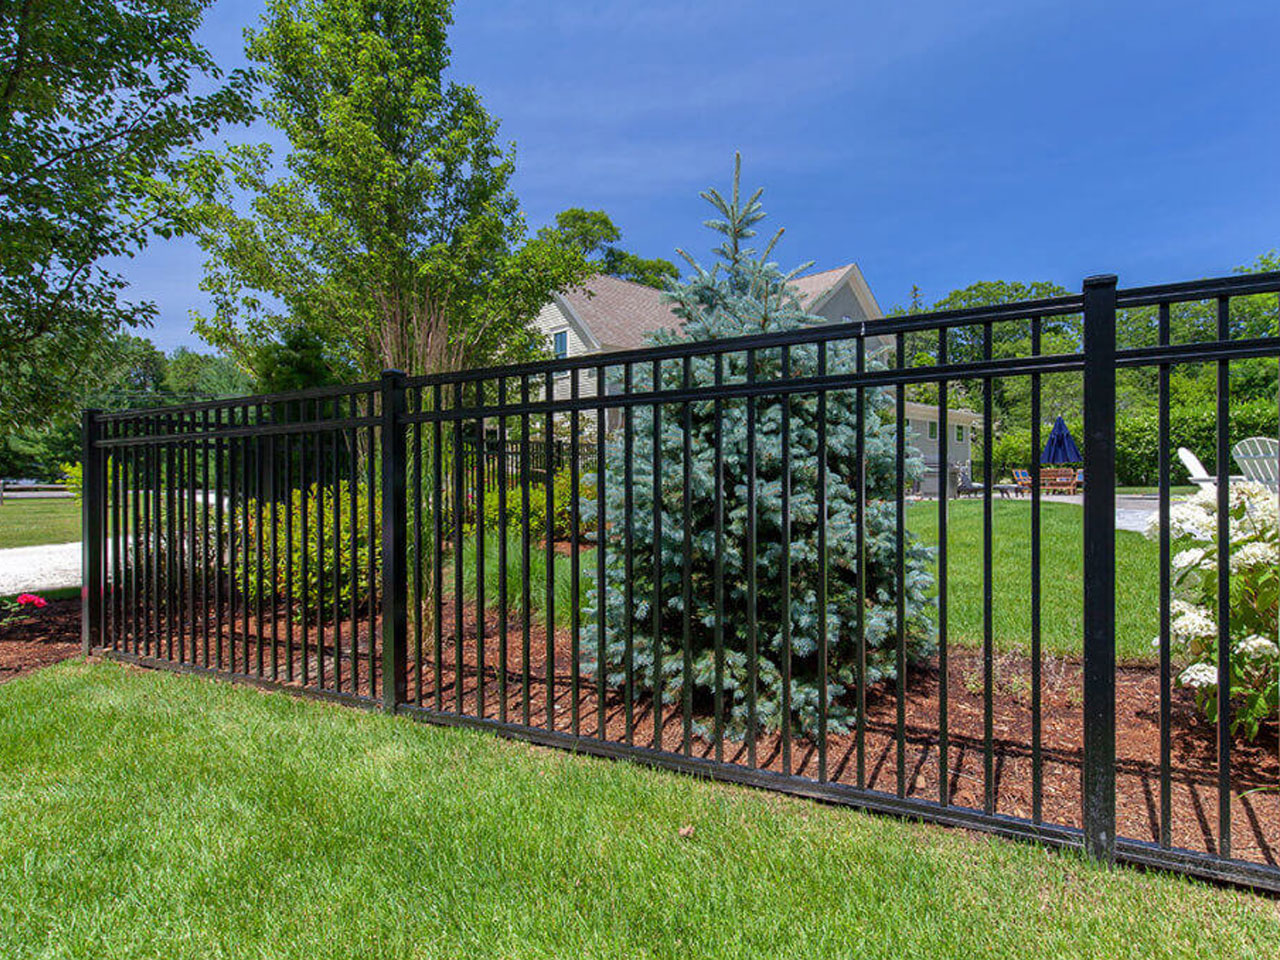 black aluminum fencing around a yard surrounded by trees